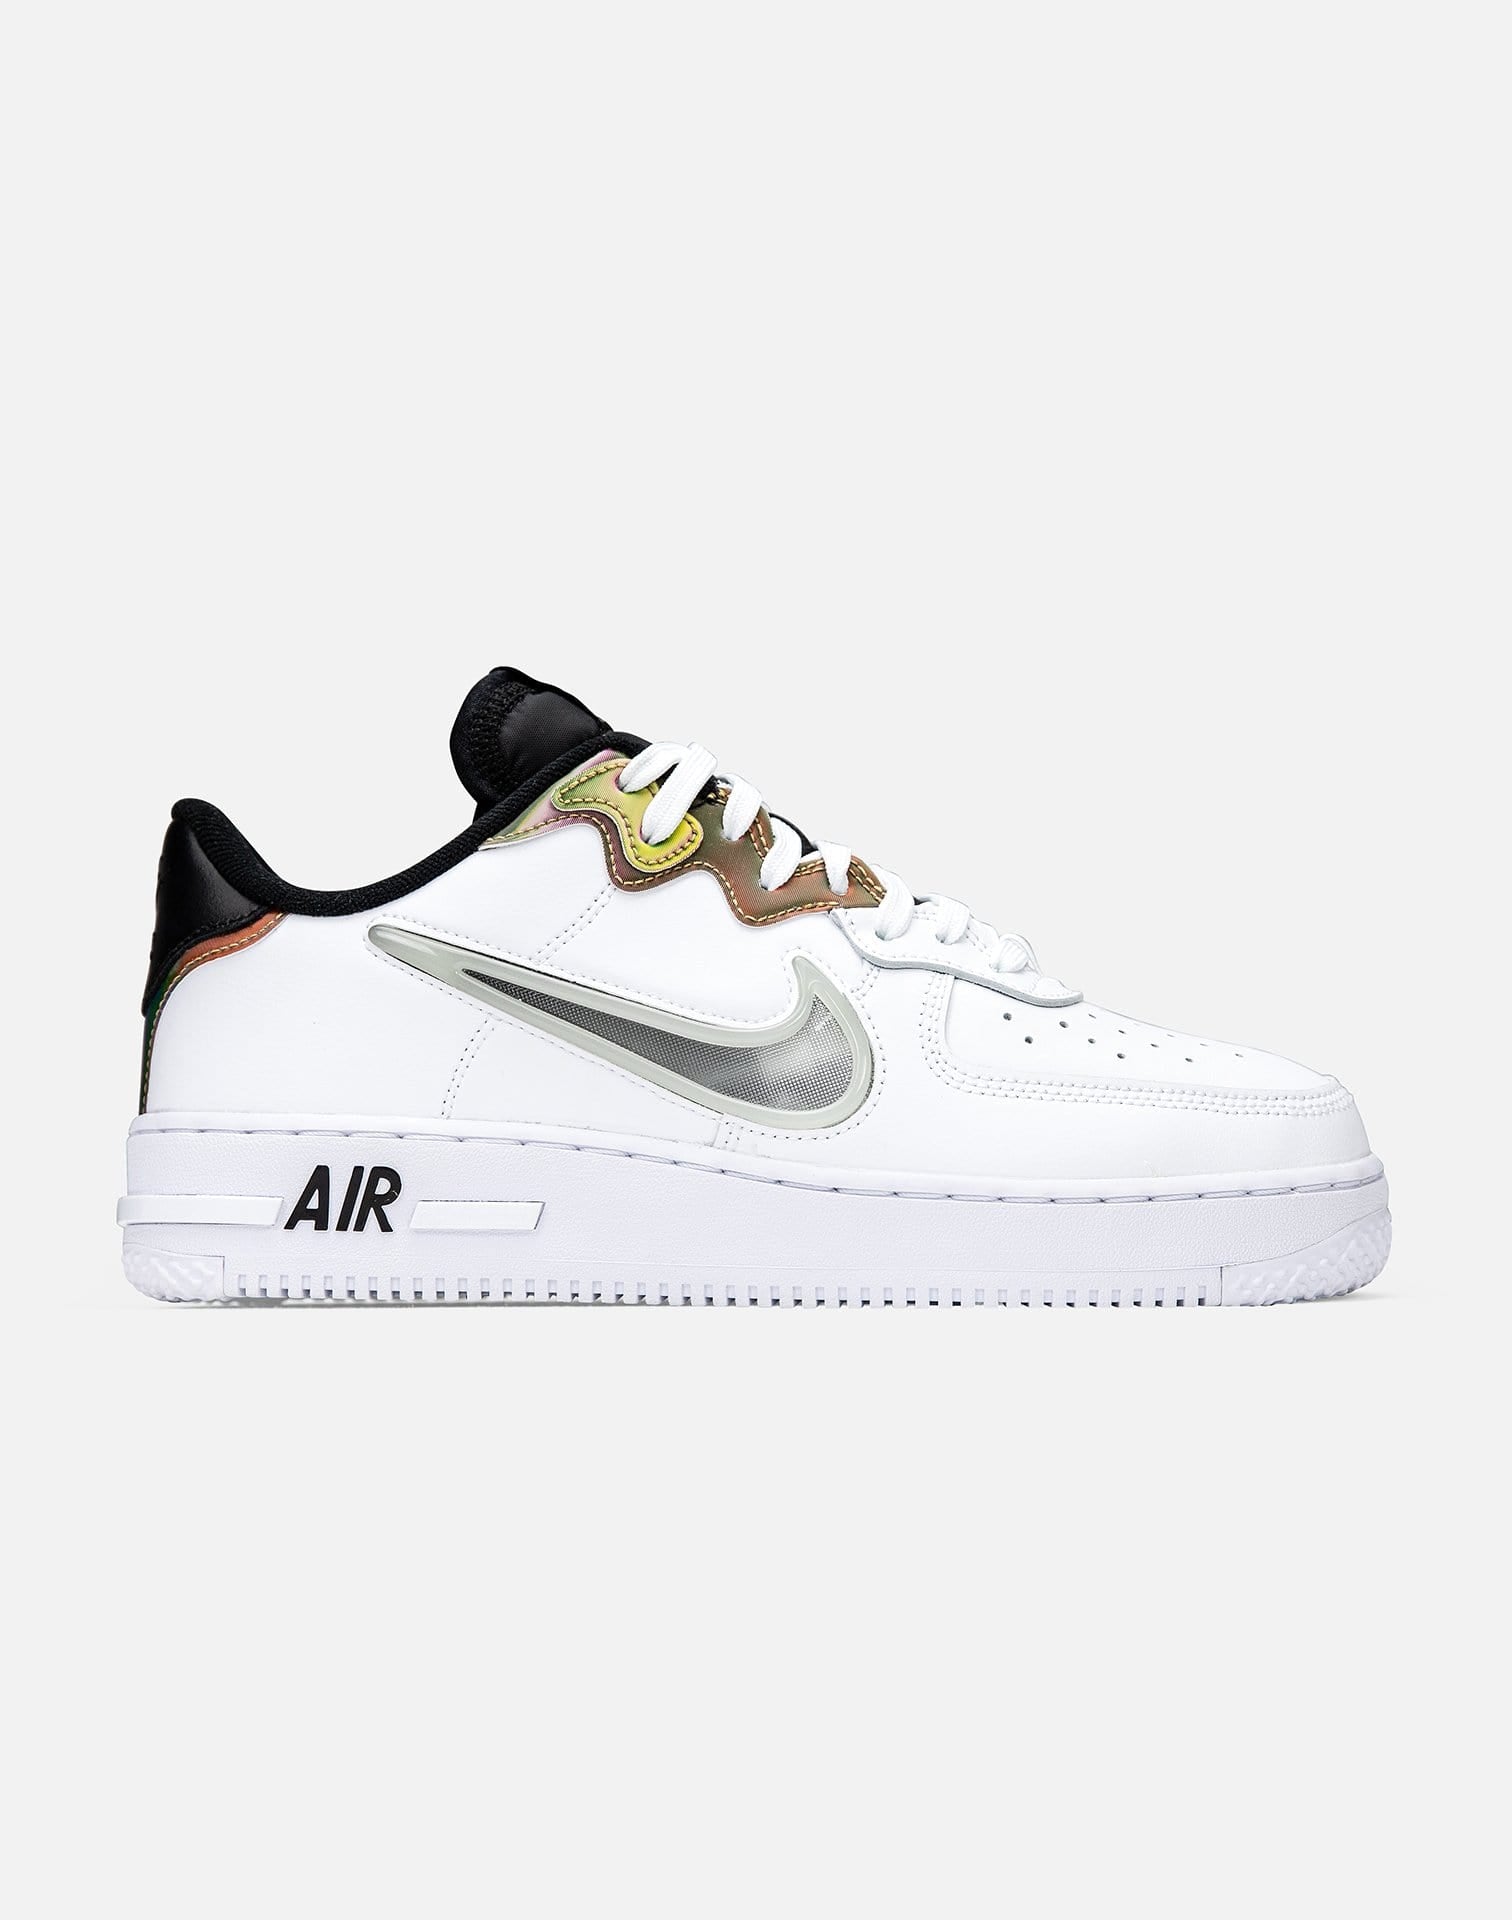 AIR FORCE 1 REACT LV8 – DTLR